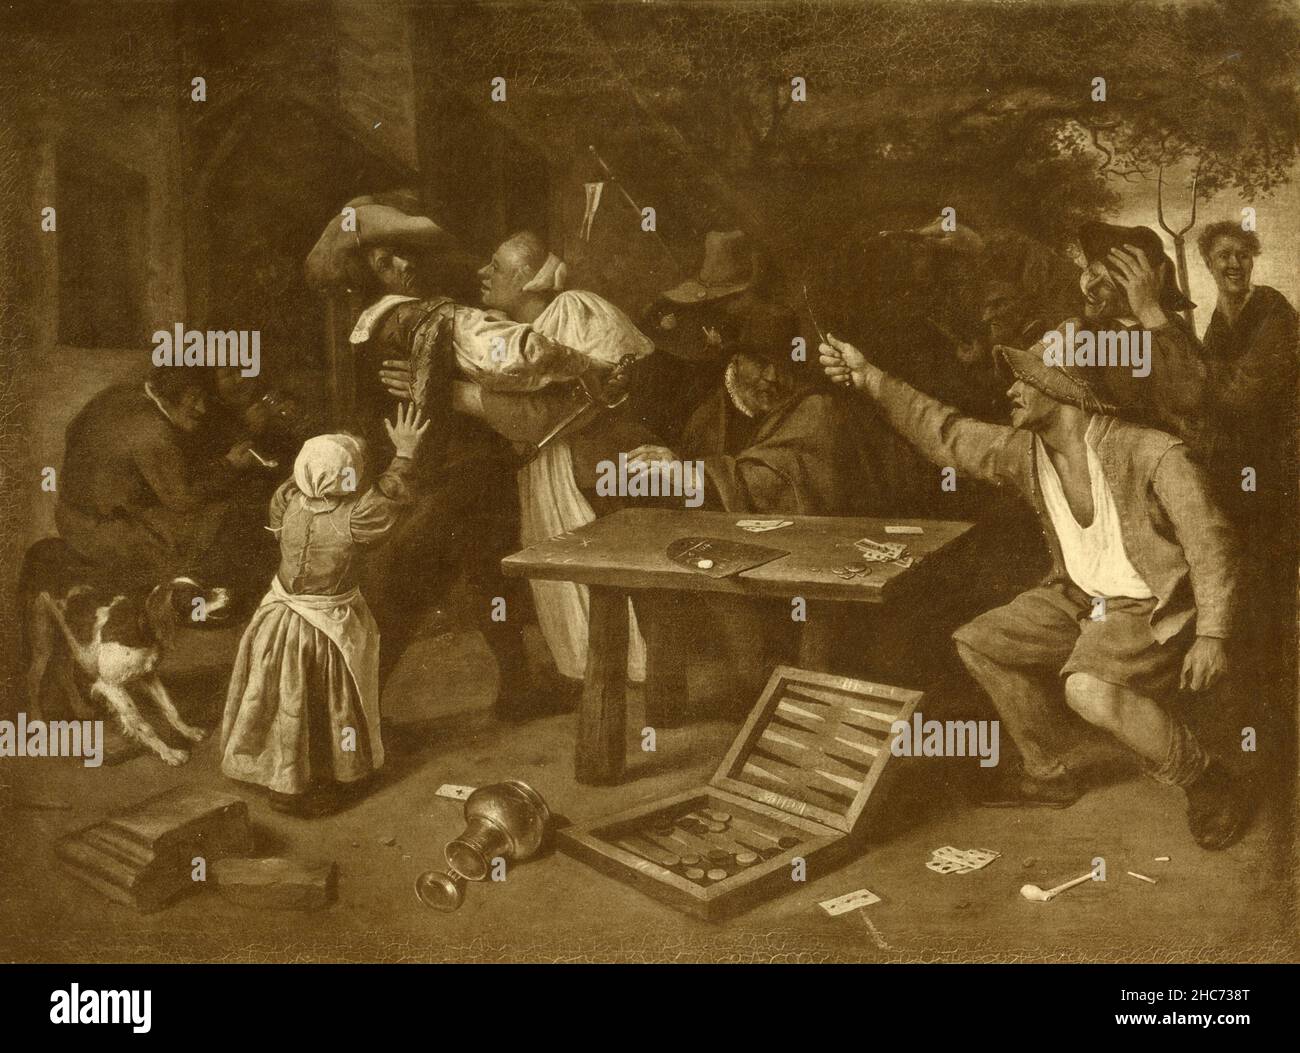 The Dispute in the Game, painting by Dutch artist Jan Steen, Munich 1897 Stock Photo